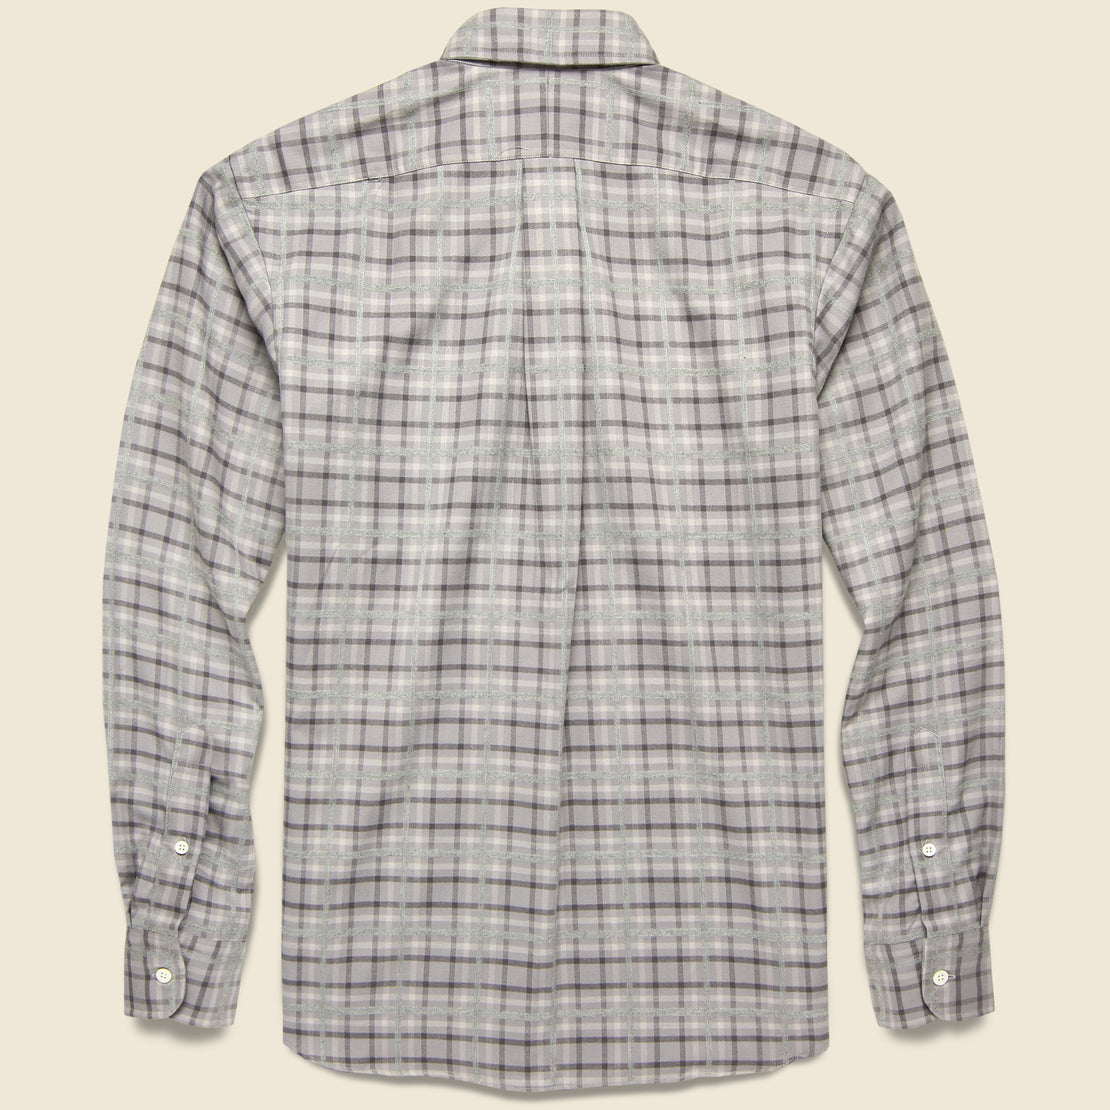 Textured Plaid Flannel - Grey - Hamilton Shirt Co. - STAG Provisions - Tops - L/S Woven - Plaid